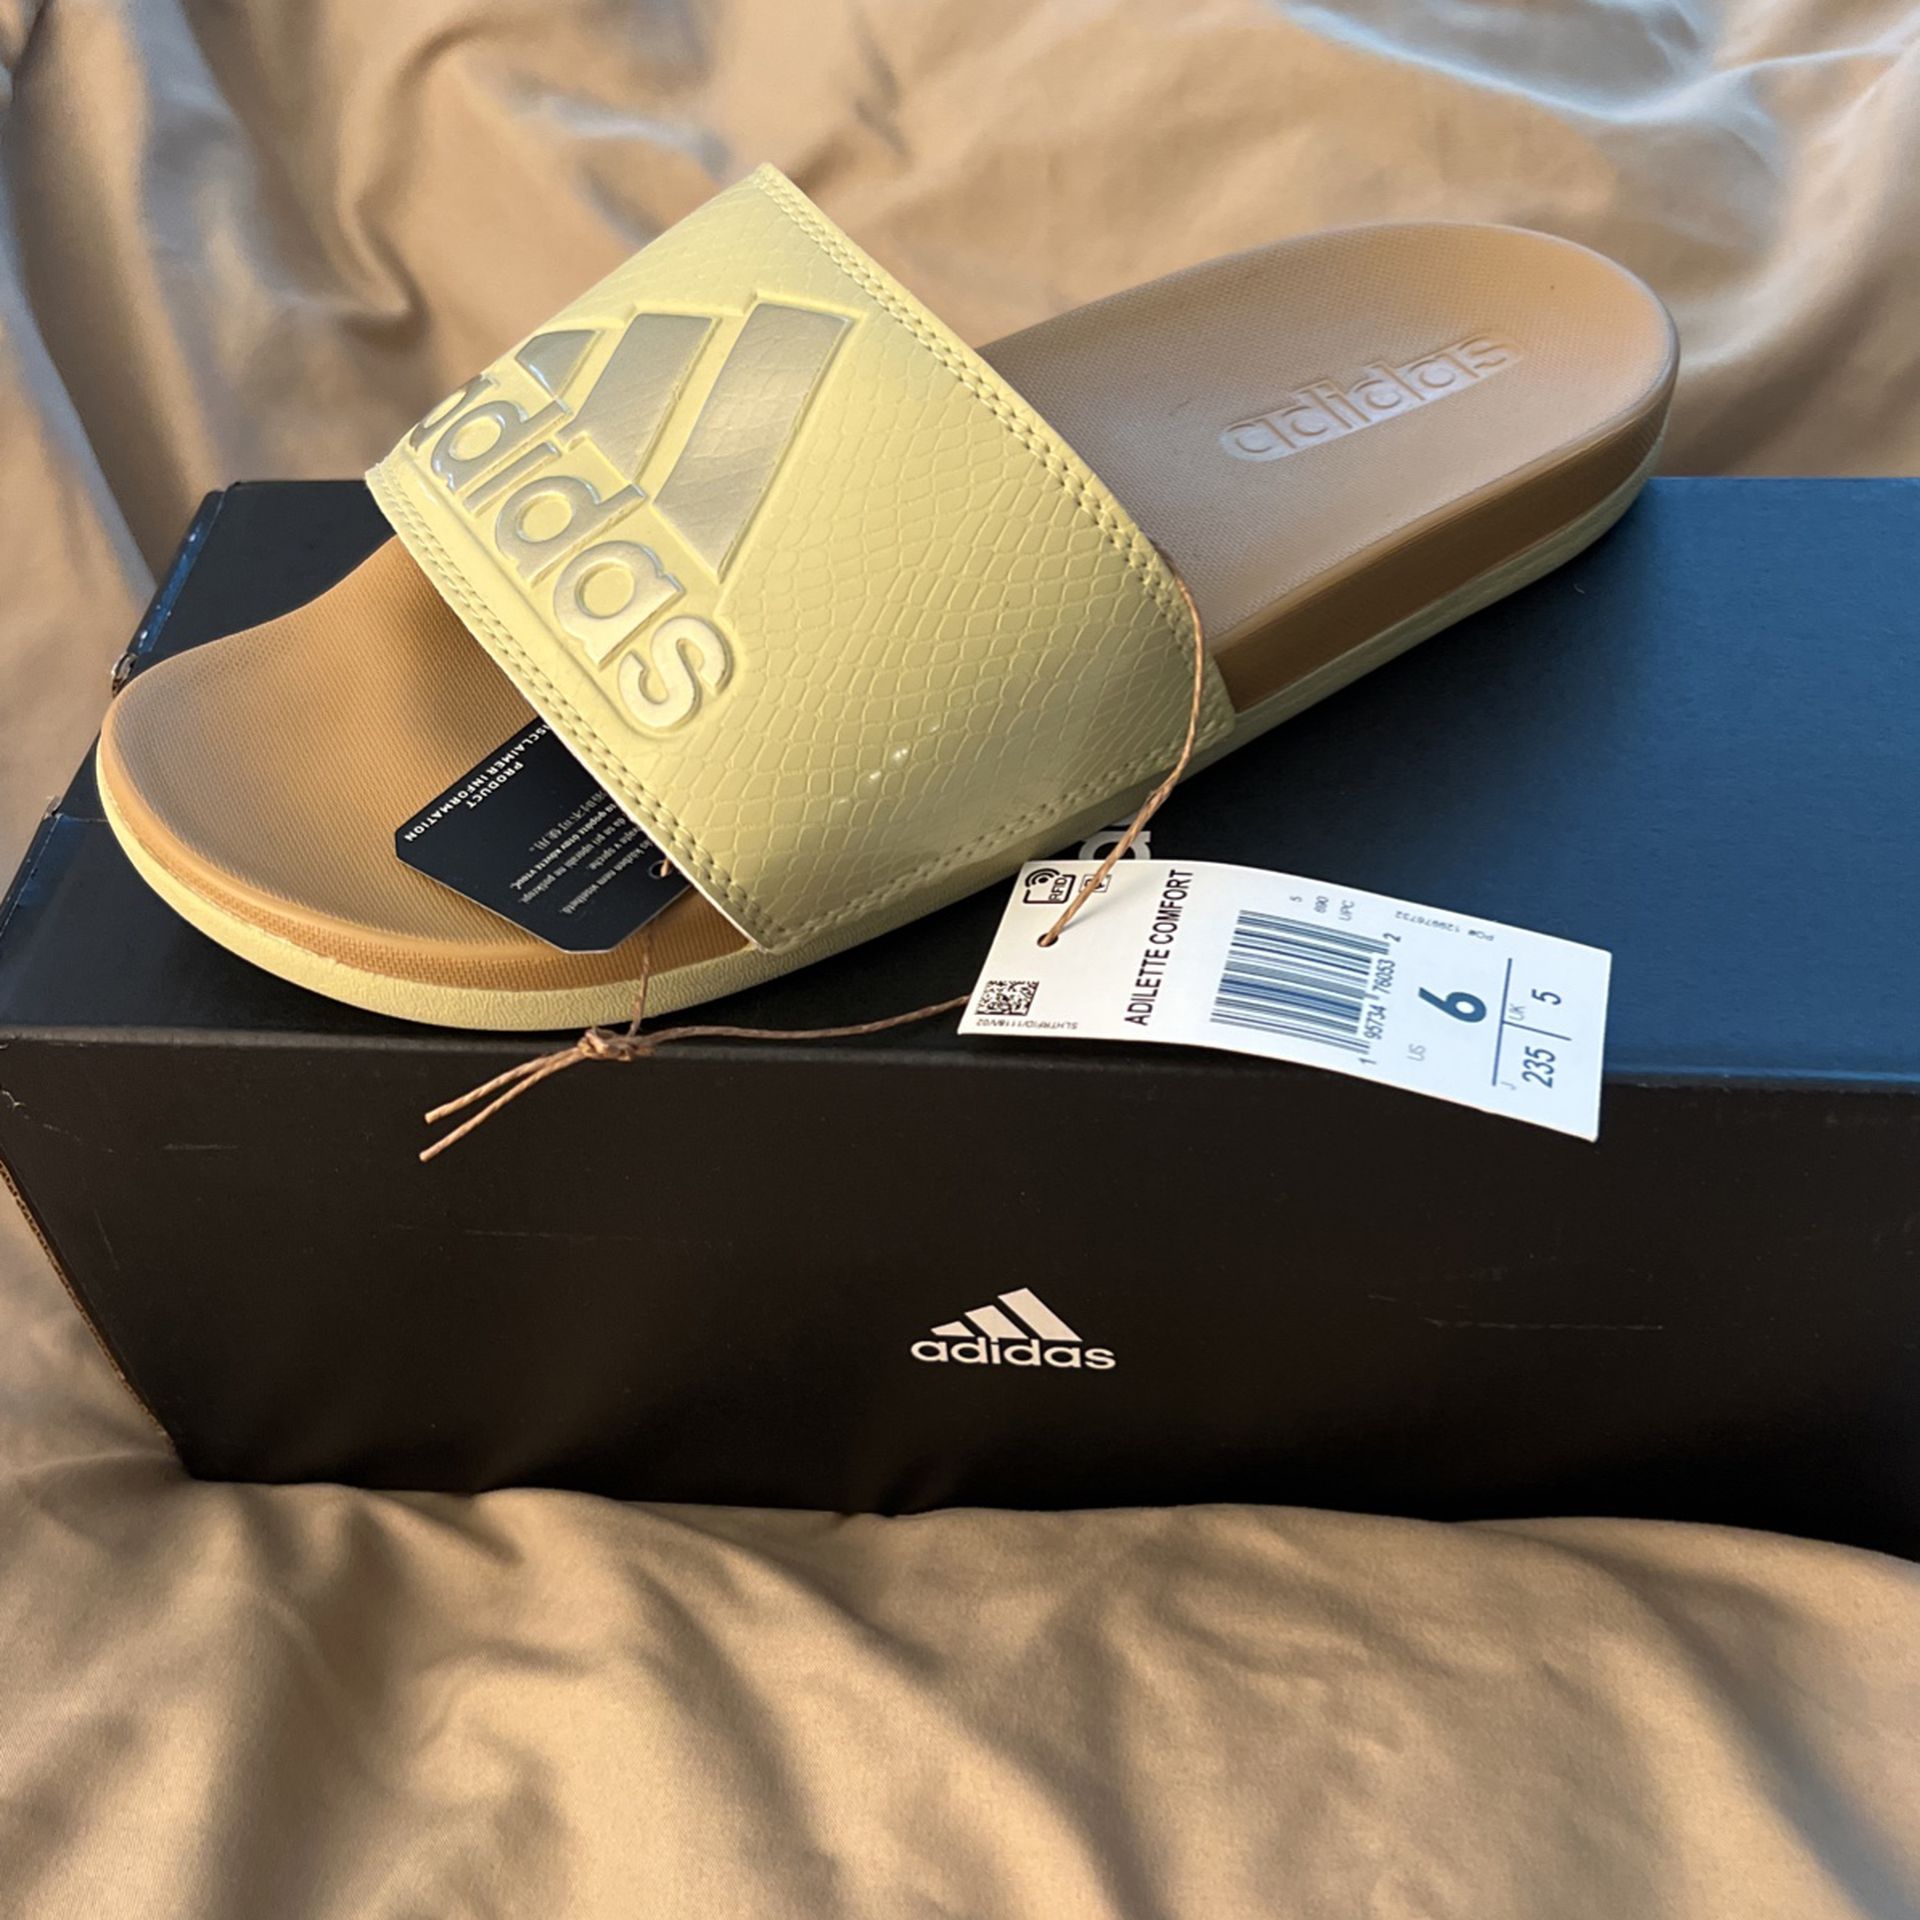 New adidas Slides With for Sale in Chula Vista, CA - OfferUp